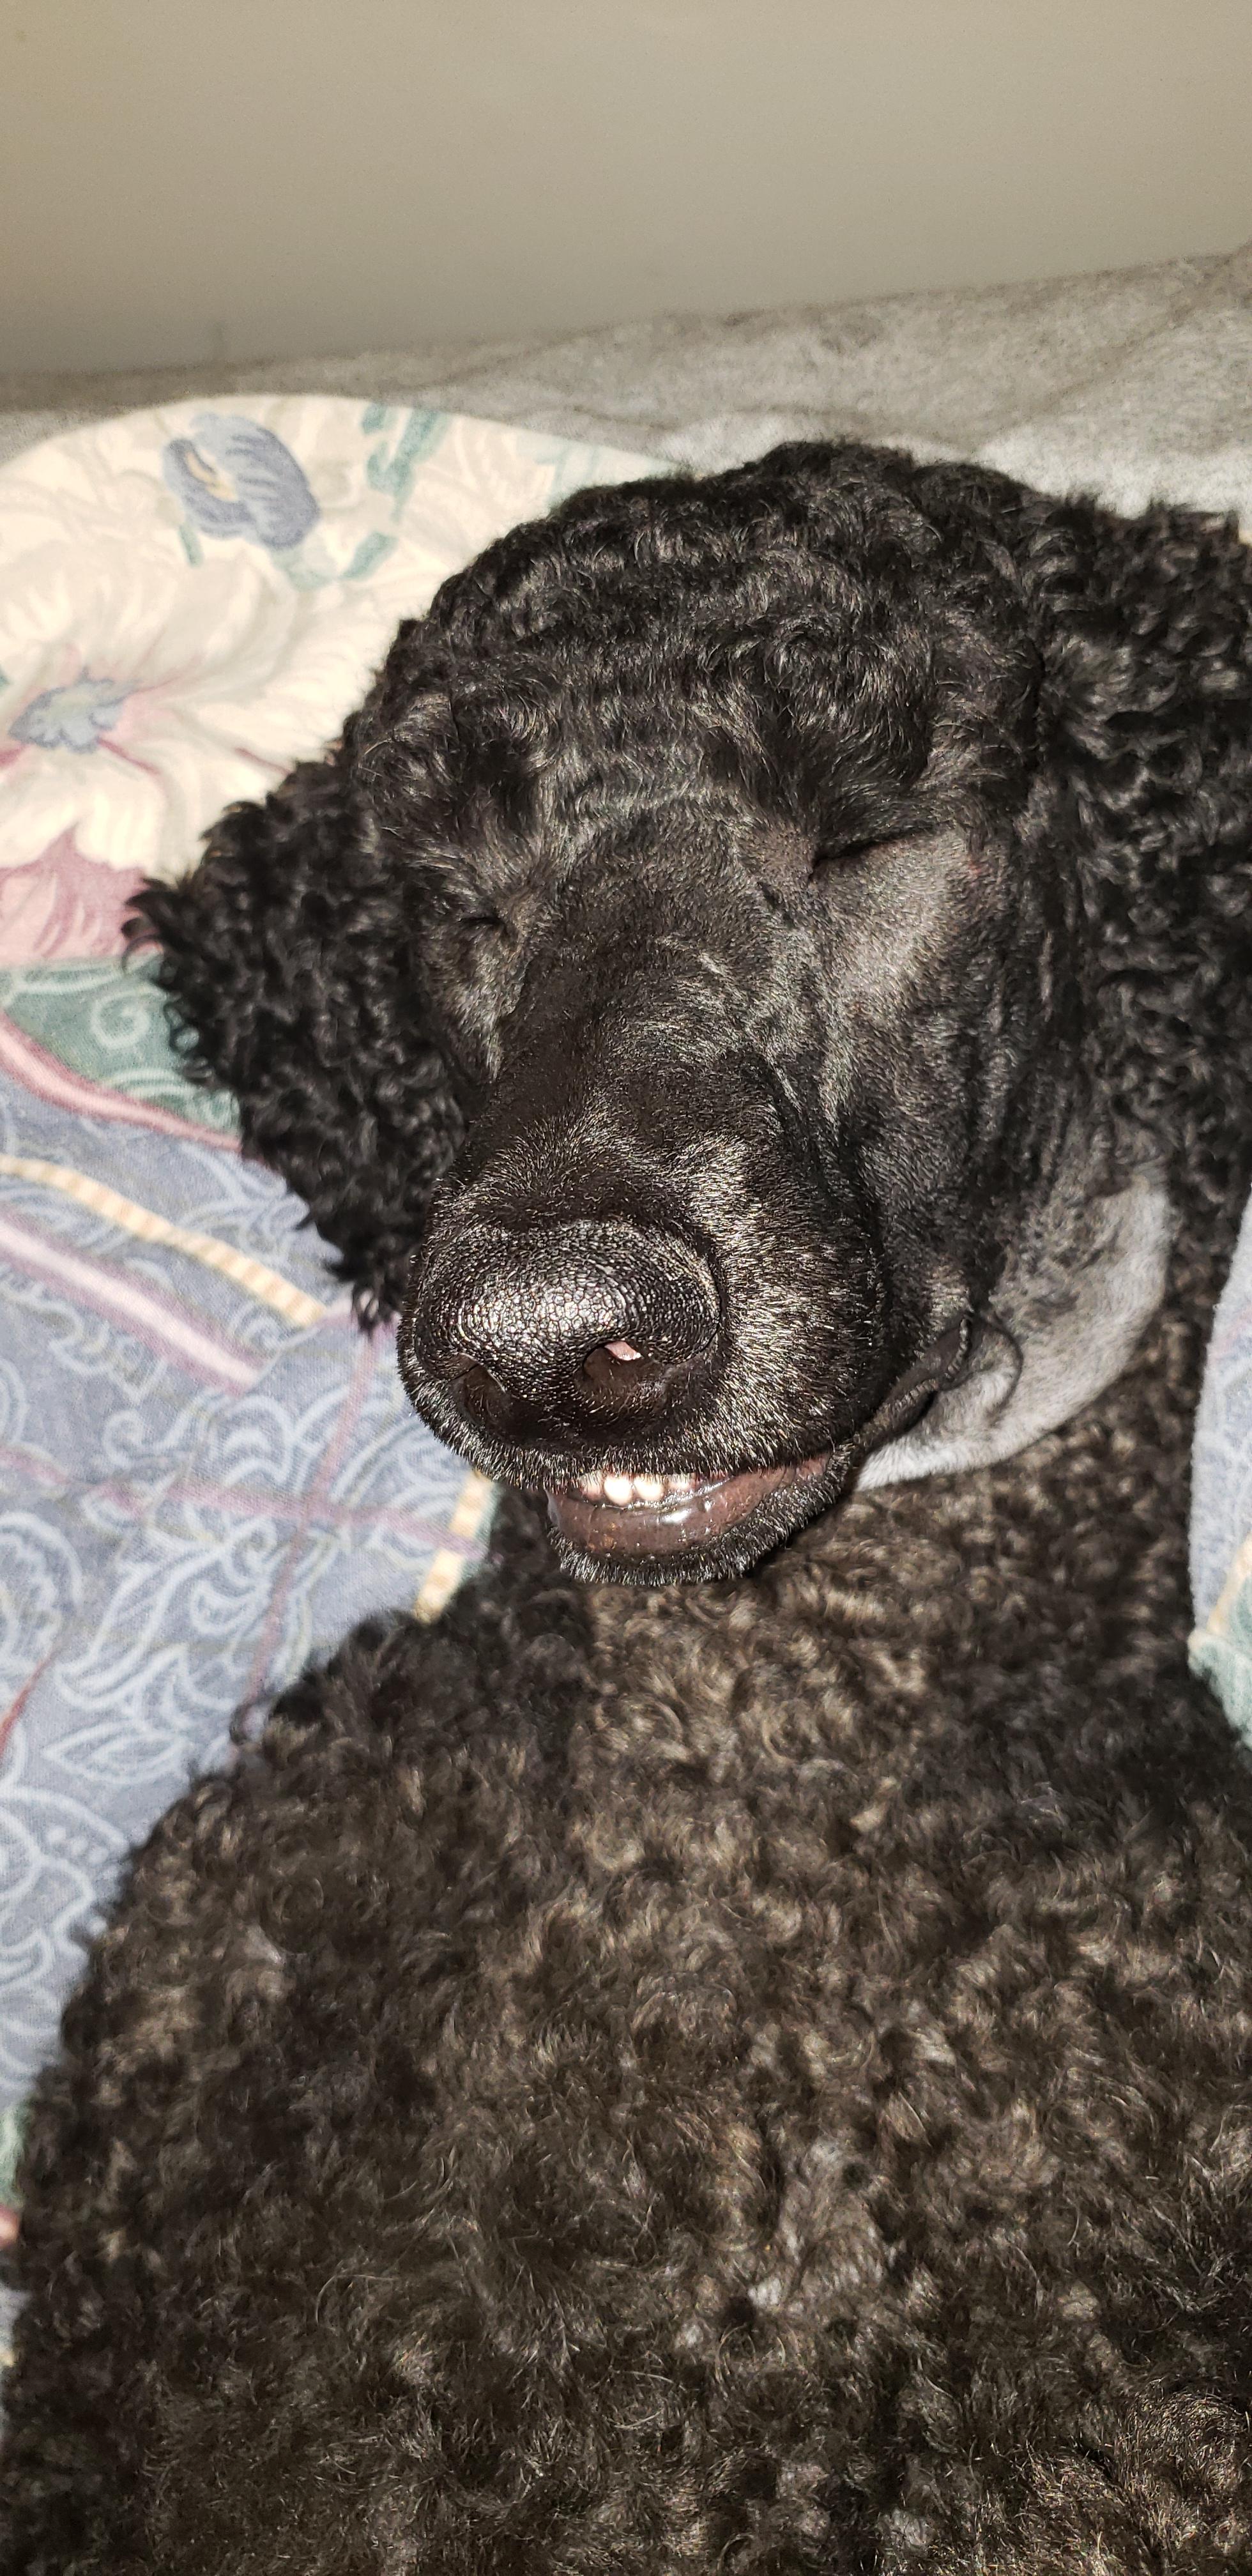 black poodle sleeping soundly in bed